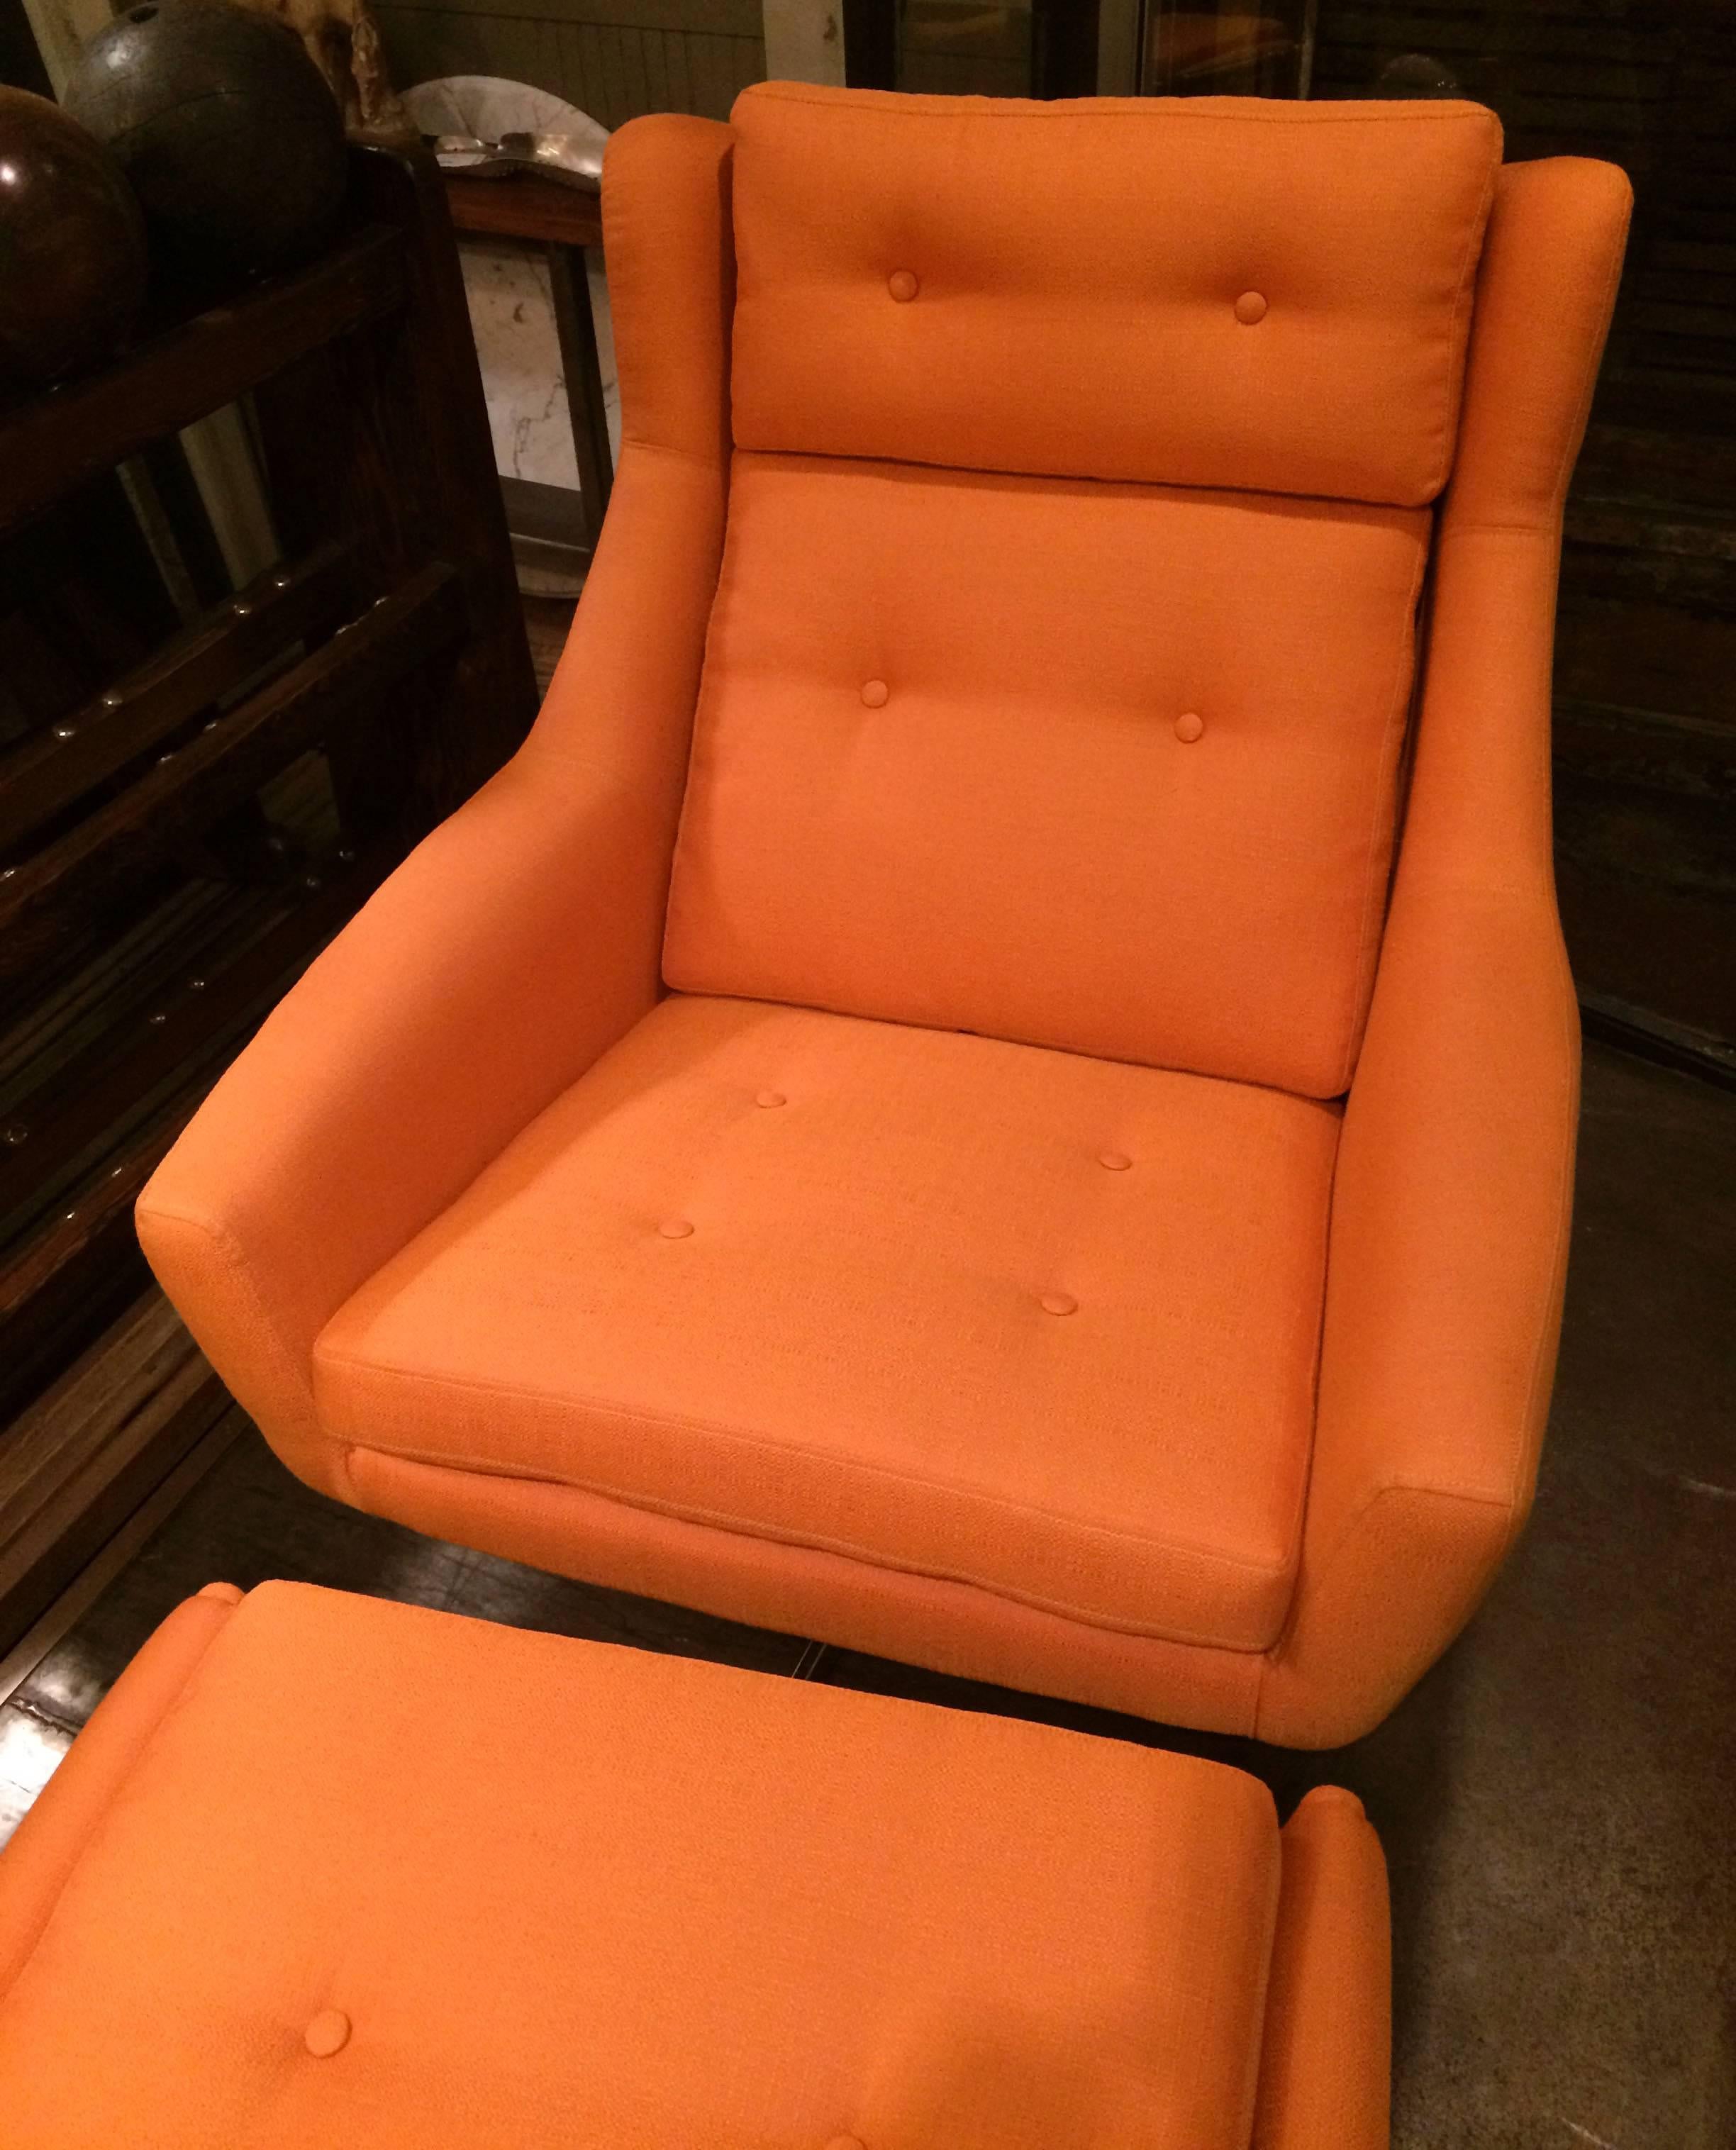 1950s, Mid-Century Modern, upholstered, reclining lounge chair that swivels on a chrome four prong base with matching ottoman attributed to John Stuart. Marked Made In Denmark. Both pieces are newly upholstered in a striking tangerine linen